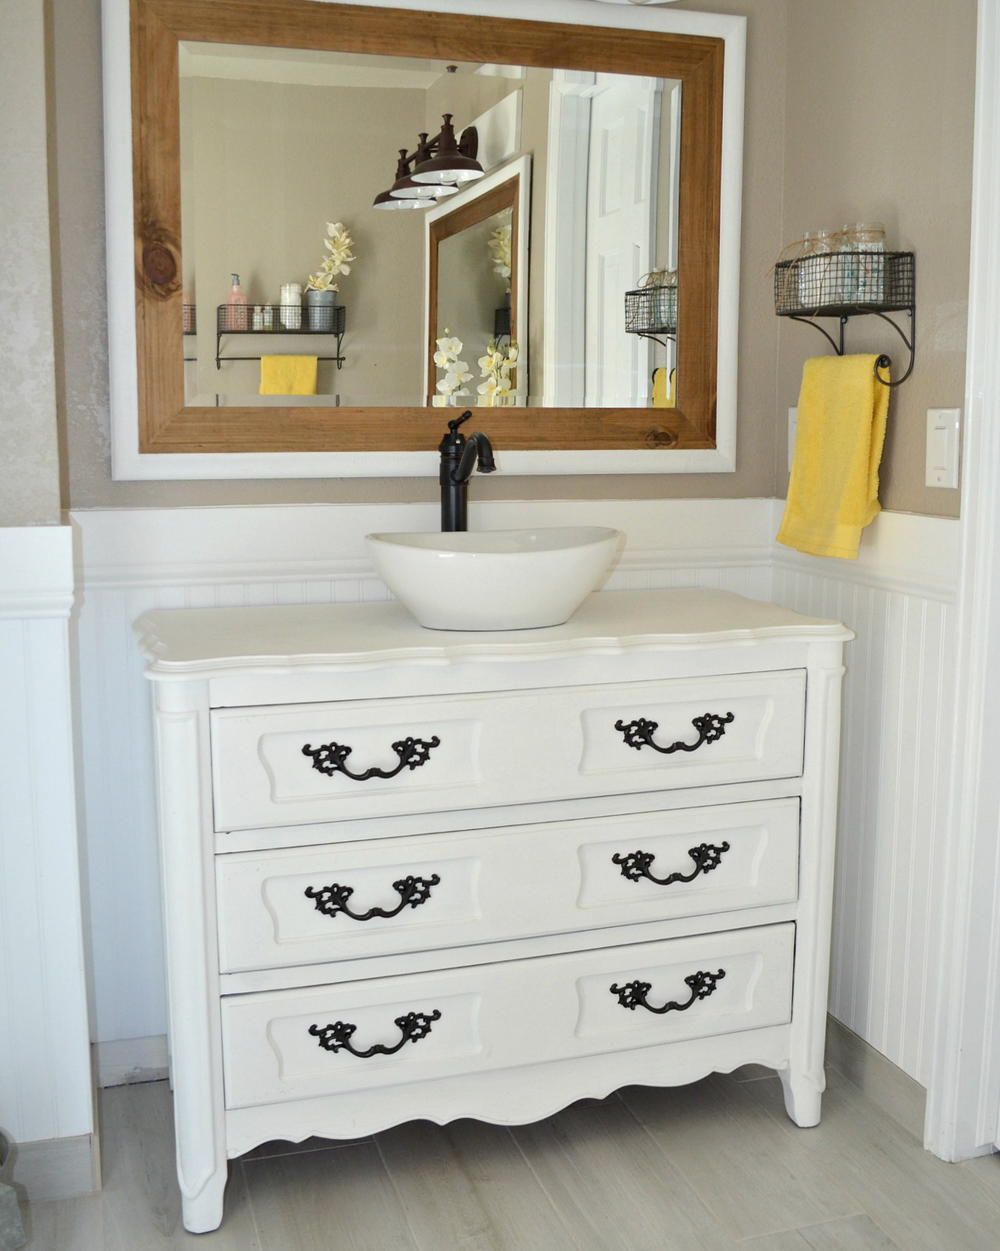  Country  Chic Upcycled Bathroom  Vanity  DIYIdeaCenter com